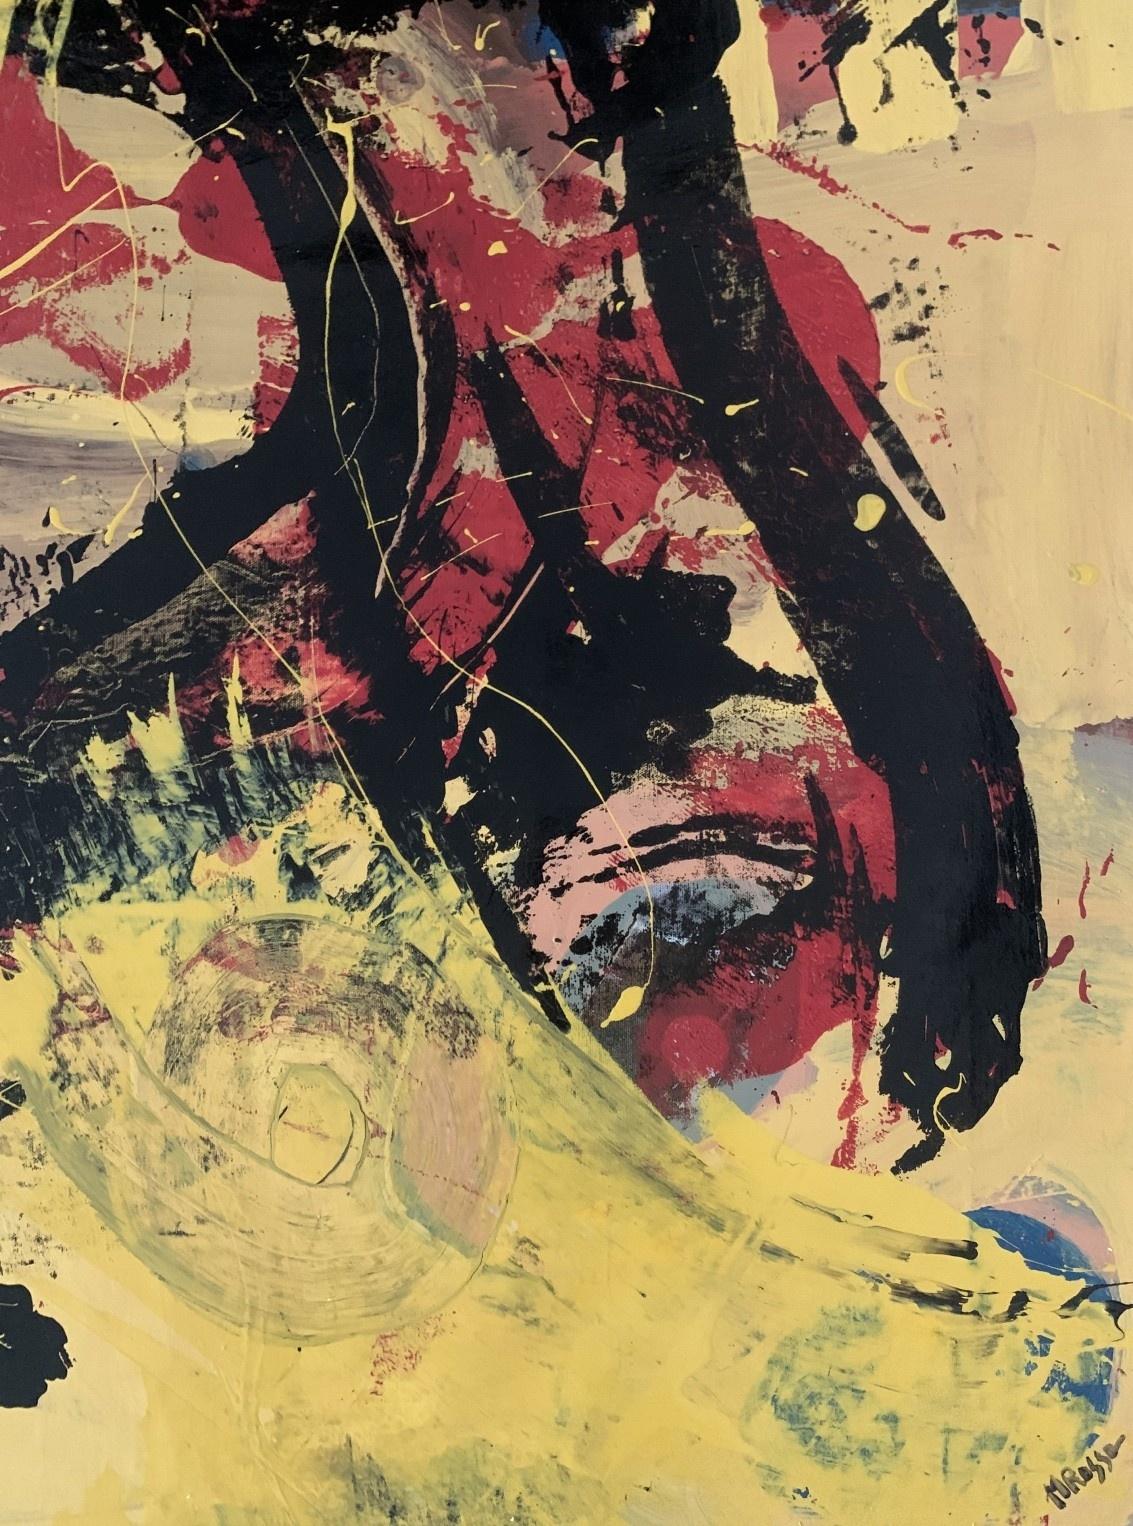 Abstract painting by Polish artist living in USA Monika Rossa. Painting in style of gestural abstraction with dynamic brush strokes and shapes. Main color is yellow balanced with red and black as well as blue accents. Do to the composition, the